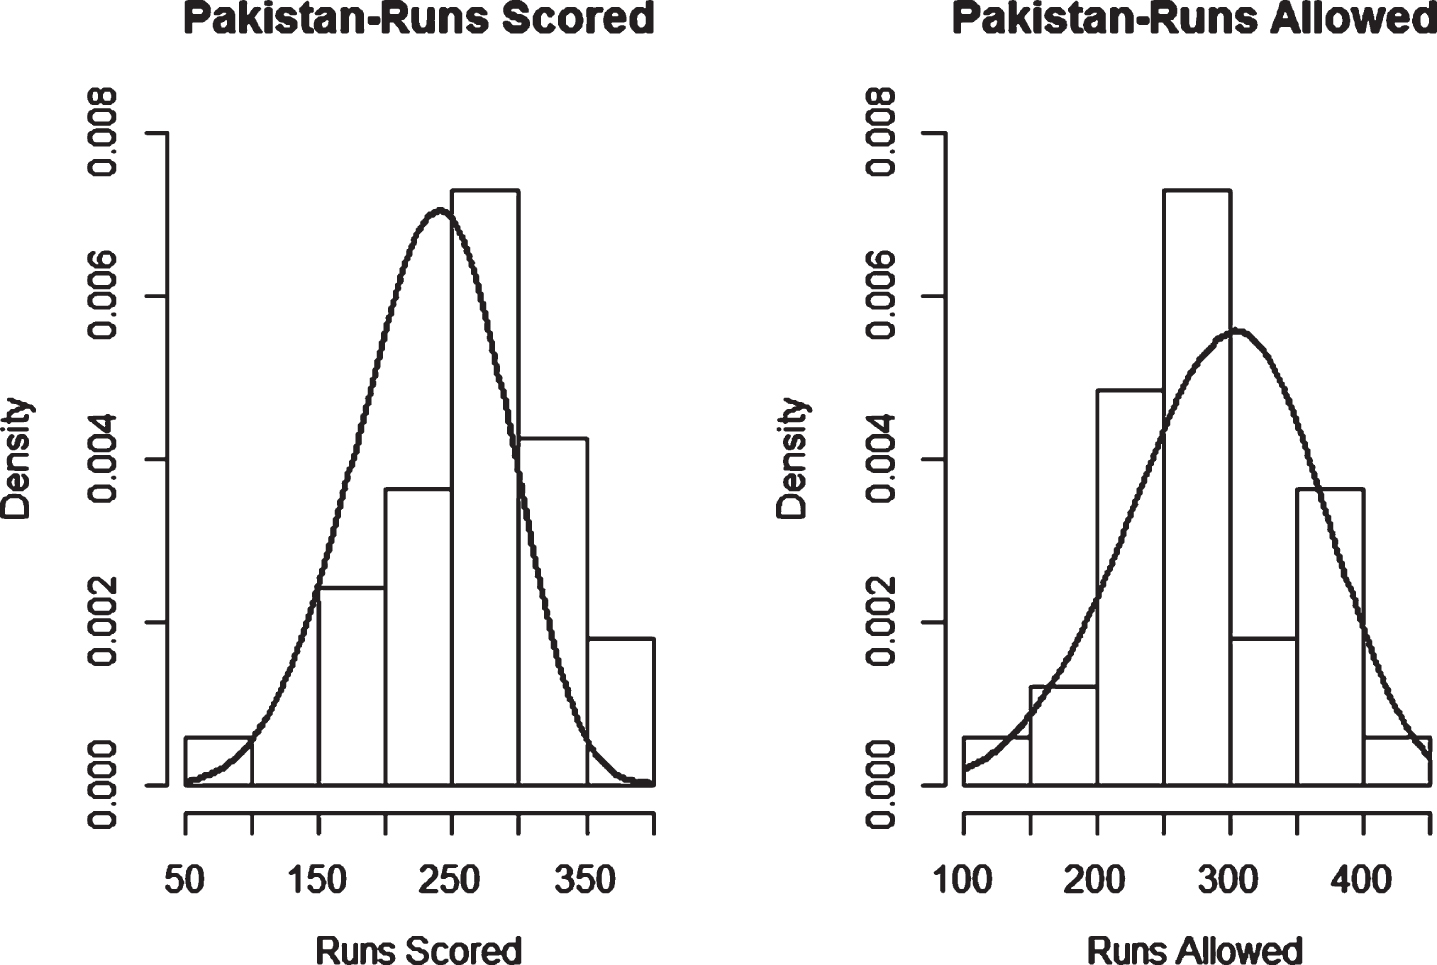 Weibull Distribution Fit for Runs Scored and Runs Allowed for Pakistan using Least Squares Method (ODI).